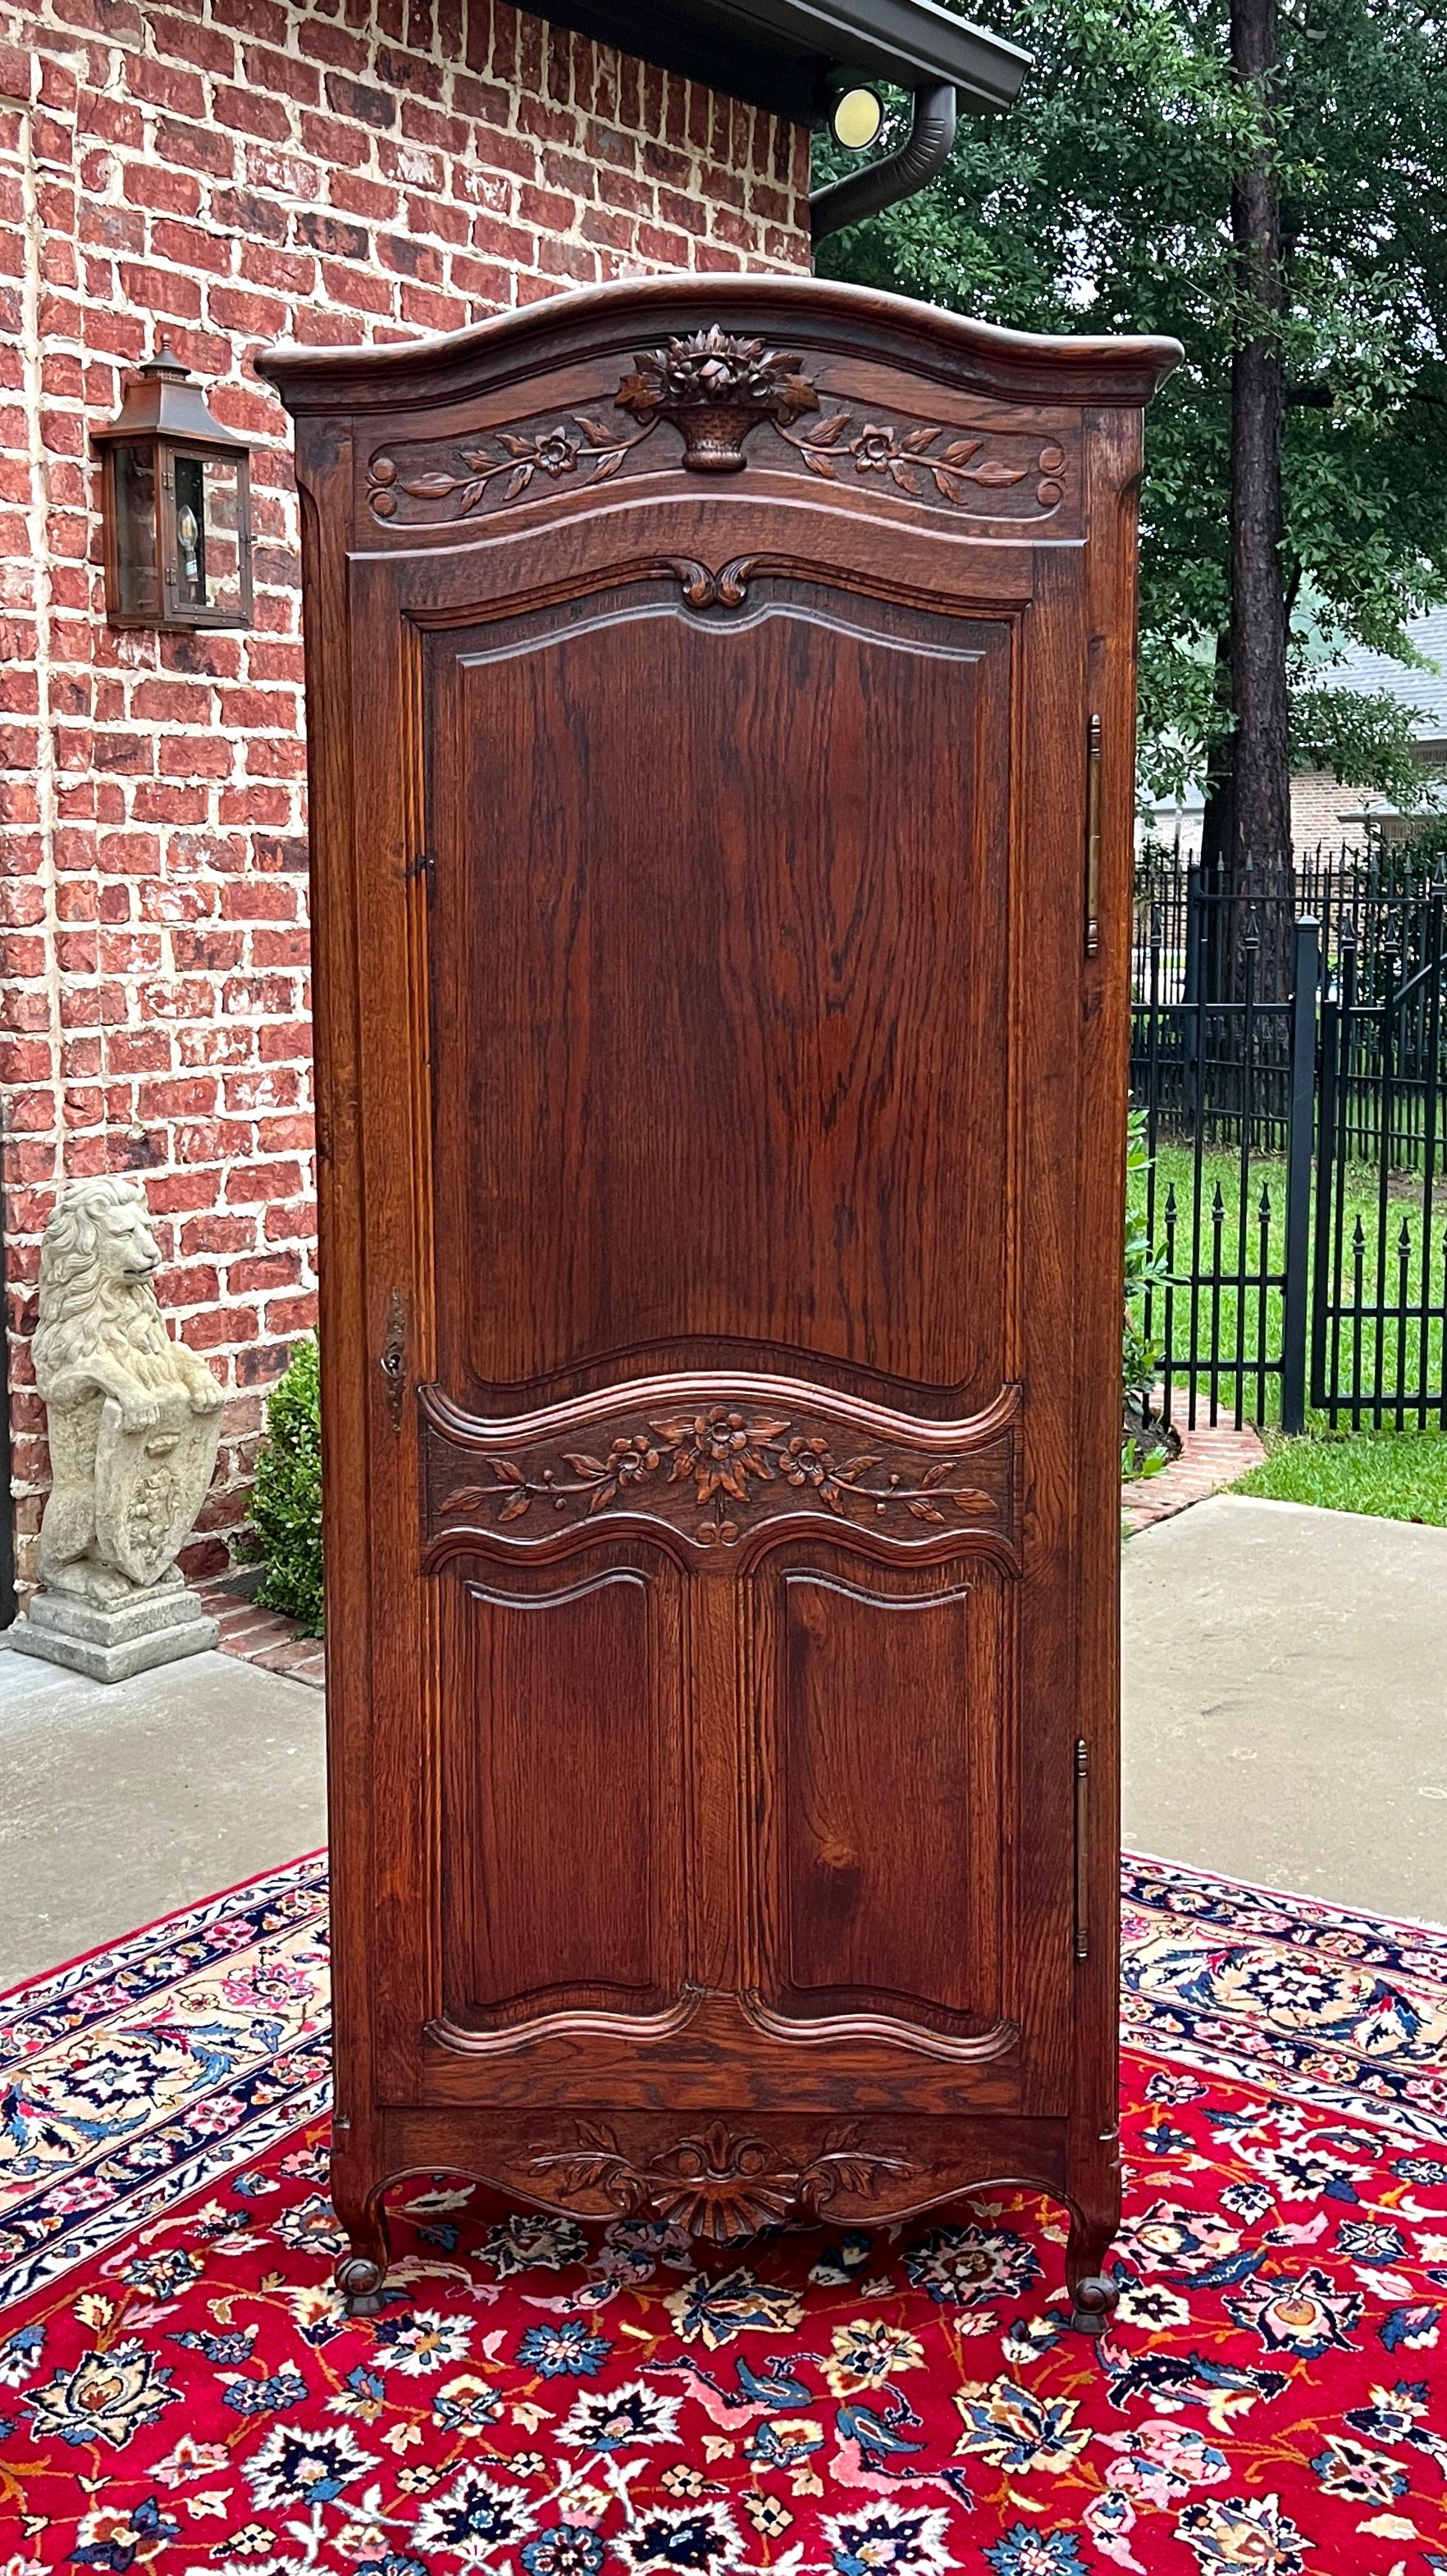    SUPERB Antique French Country Oak Armoire, Wardrobe, Linen Cabinet/Closet with Whorl Feet and Interior Shelves~~c. 
1930s 


        BEAUTIFUL STATEMENT PIECE~~early 20th century French oak armoire or wardrobe  with key~~excellent storage item